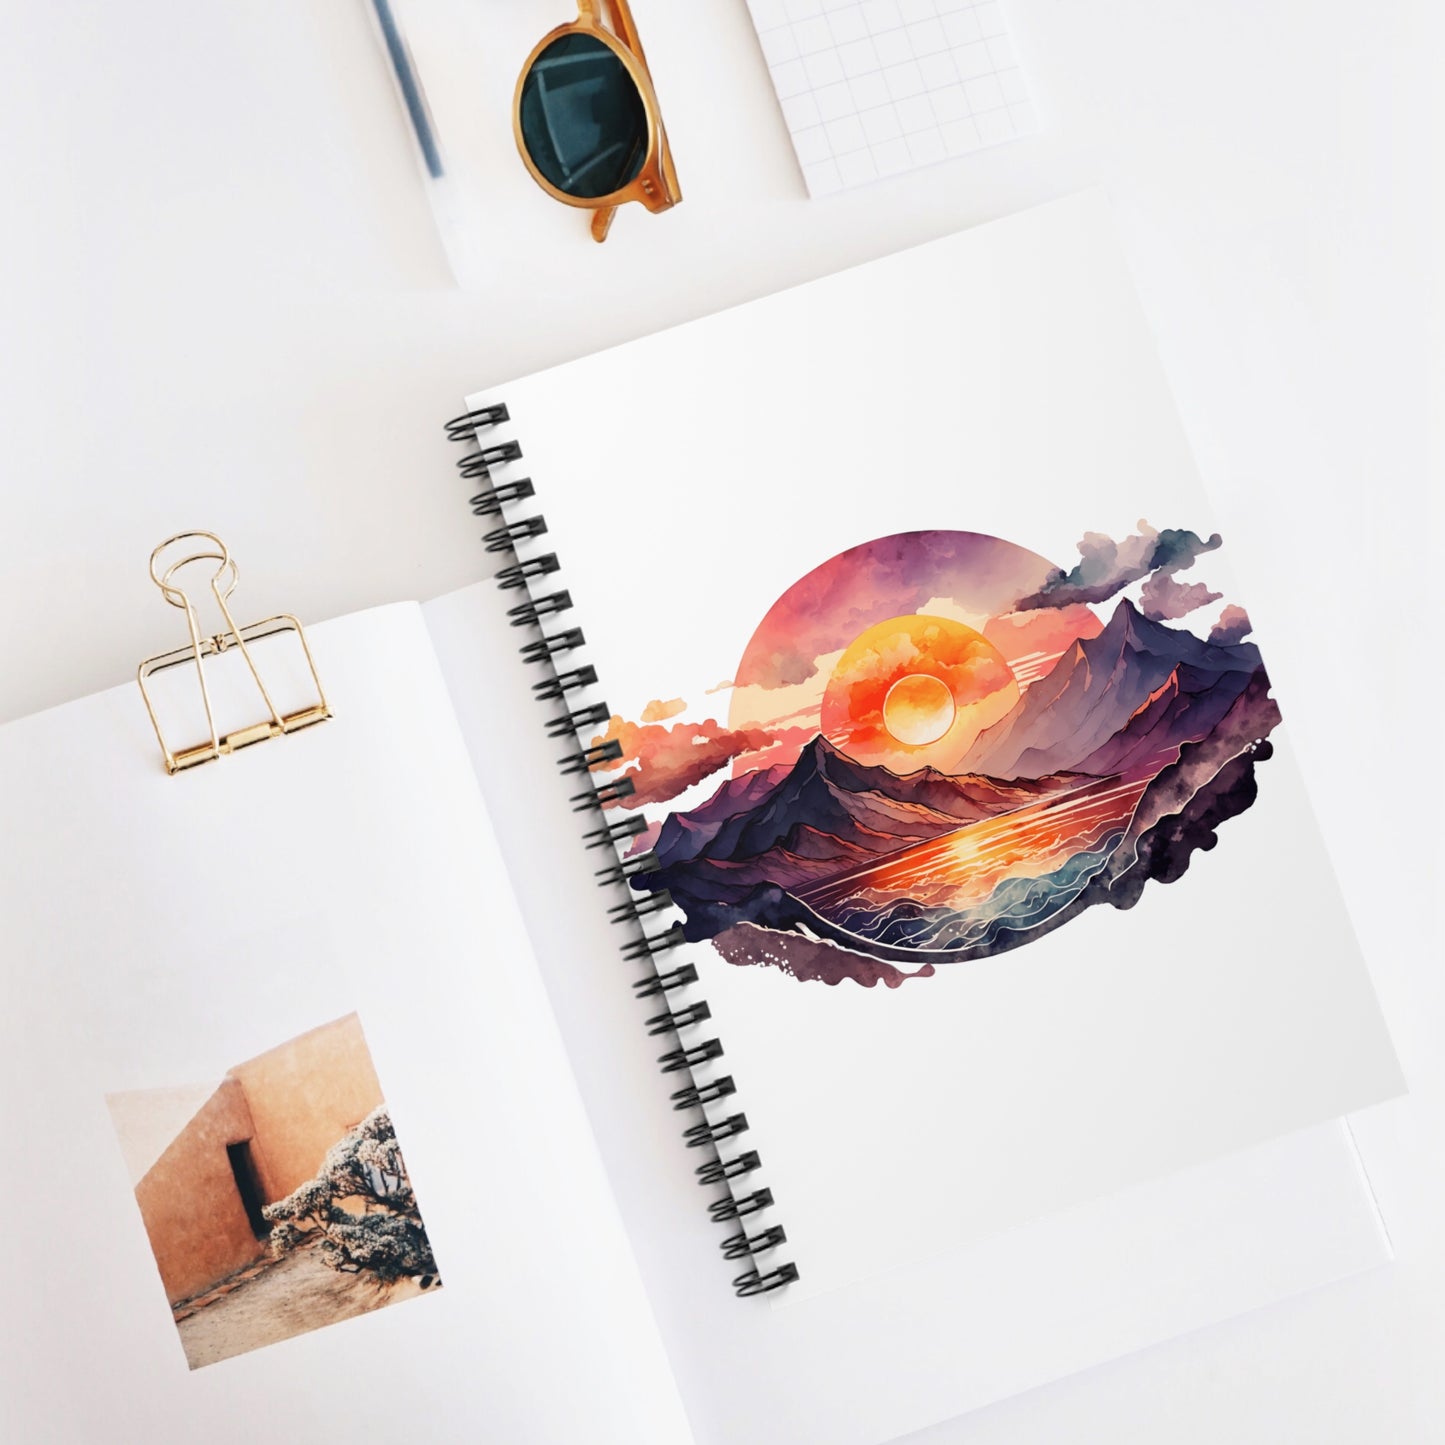 Sunrise Sunset at the Beach: Spiral Notebook - Log Books - Journals - Diaries - and More Custom Printed by TheGlassyLass.com